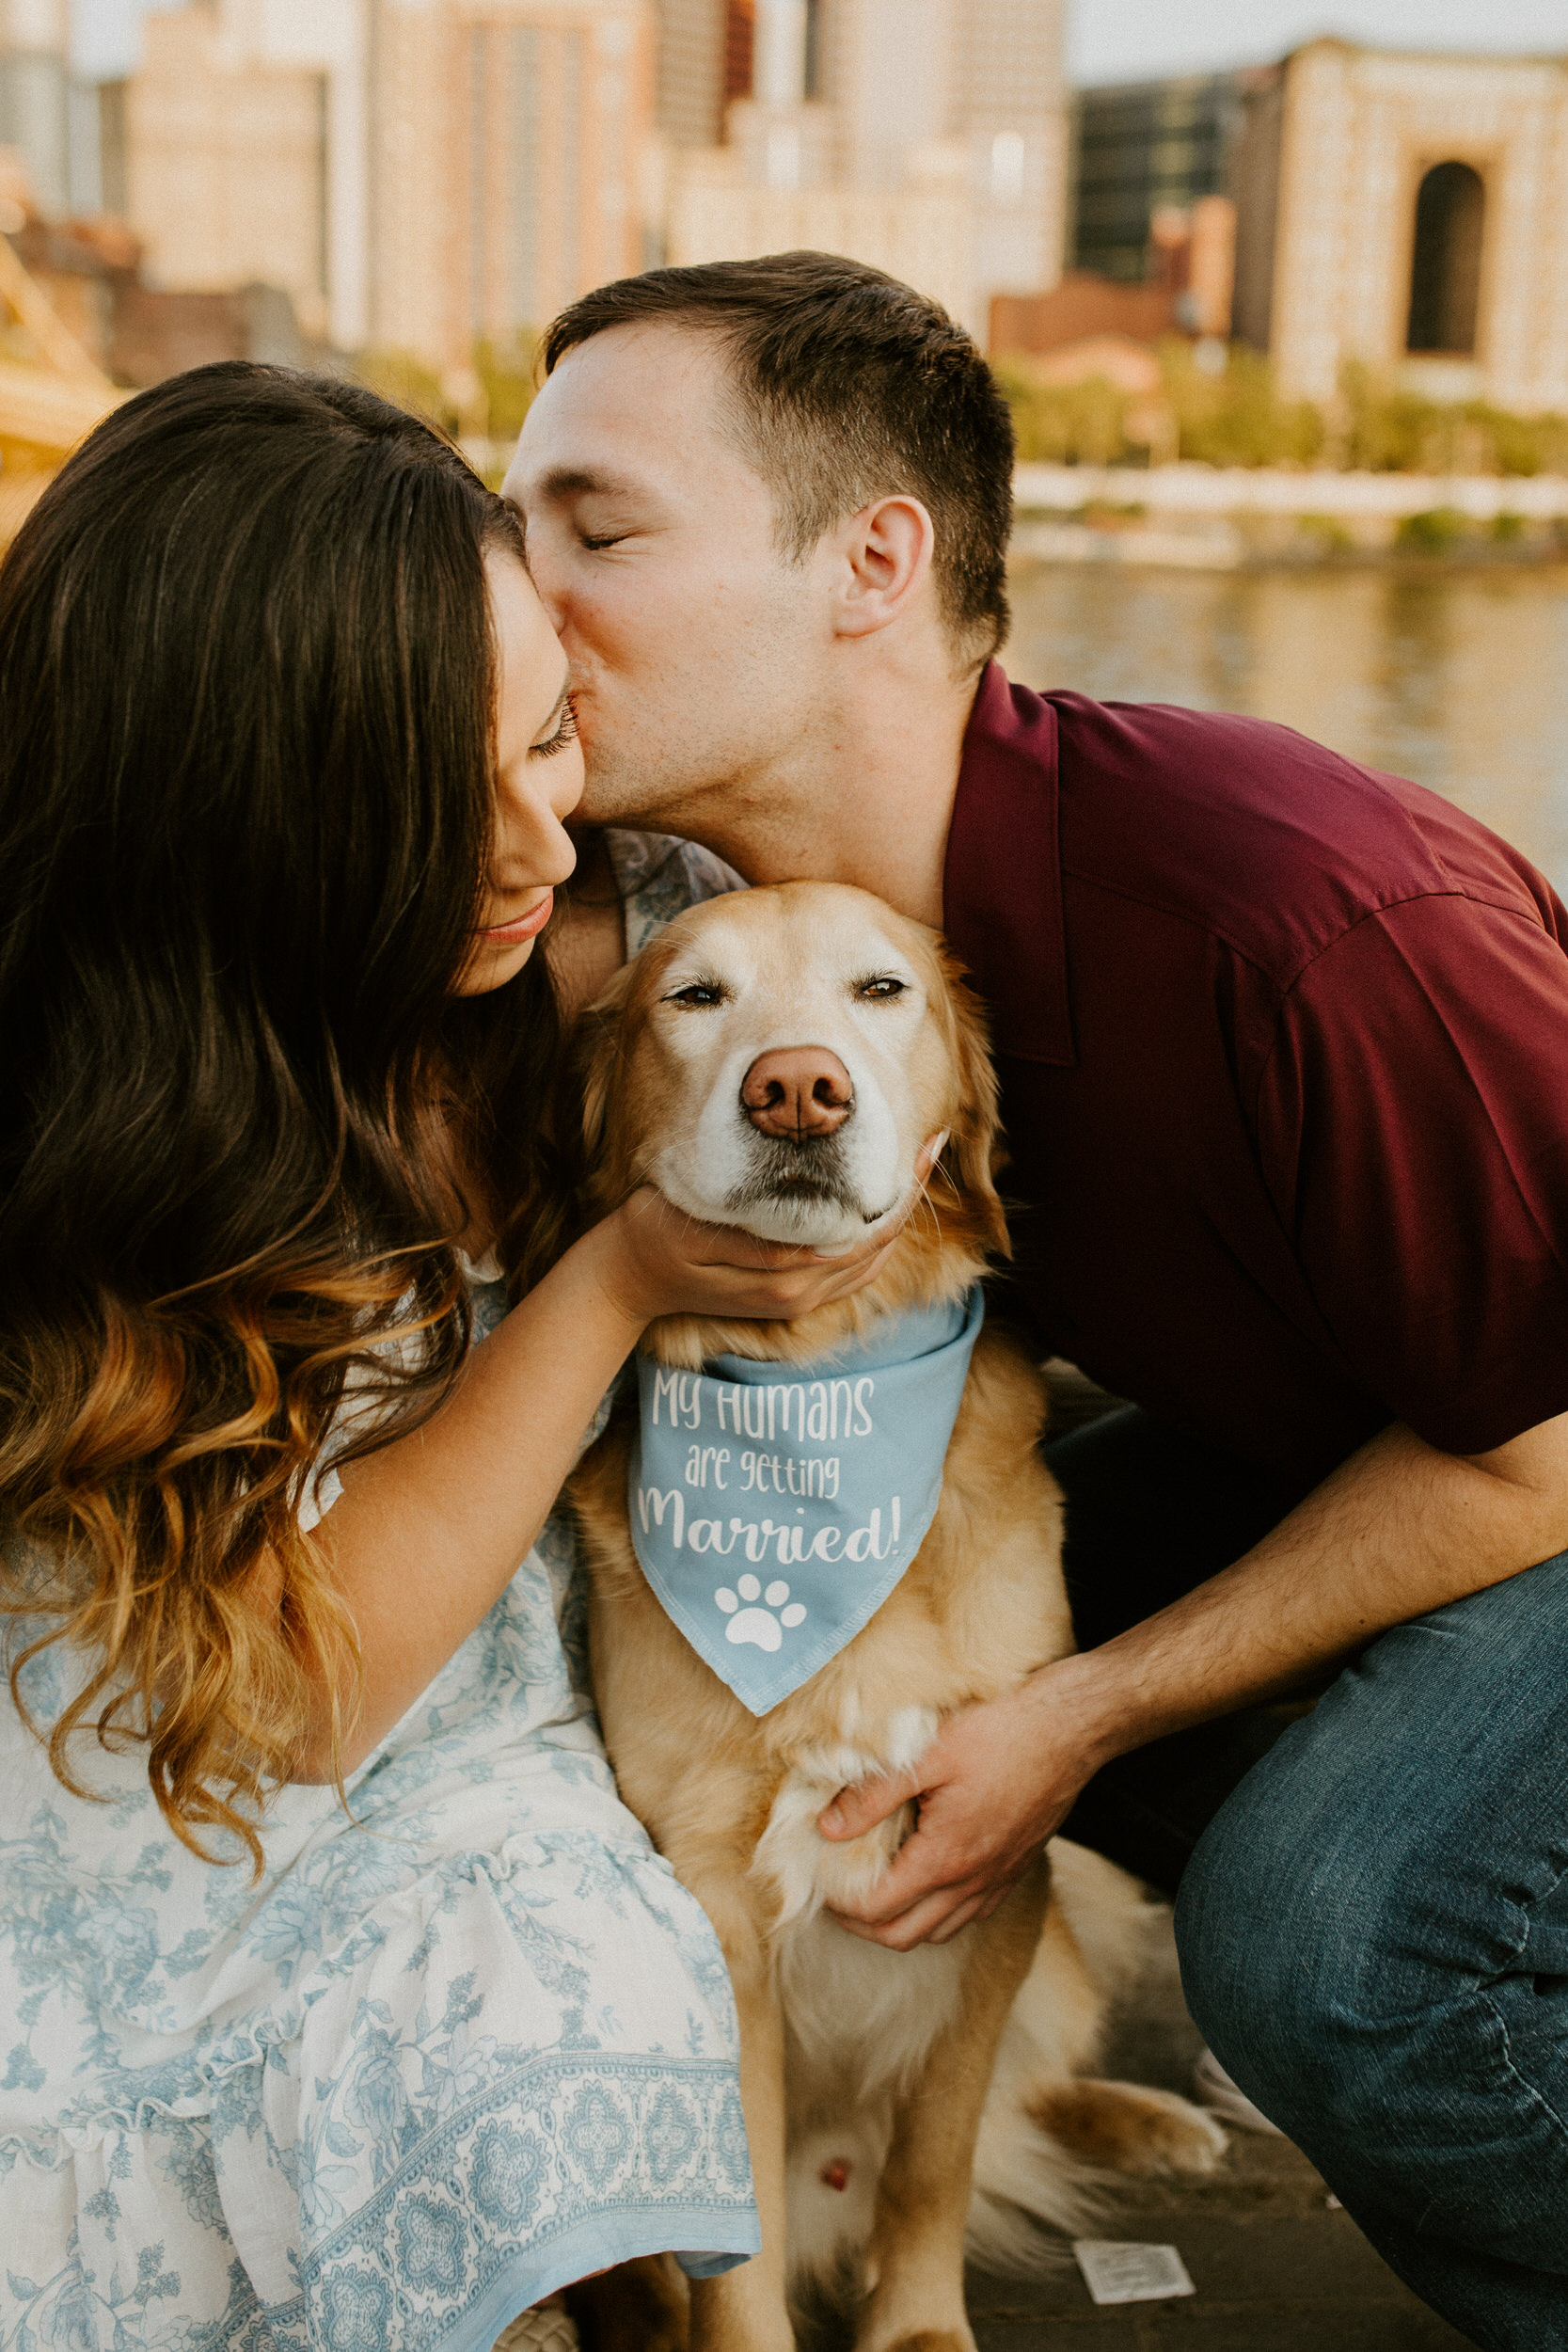 Pittsburgh North Shore Engagement Session